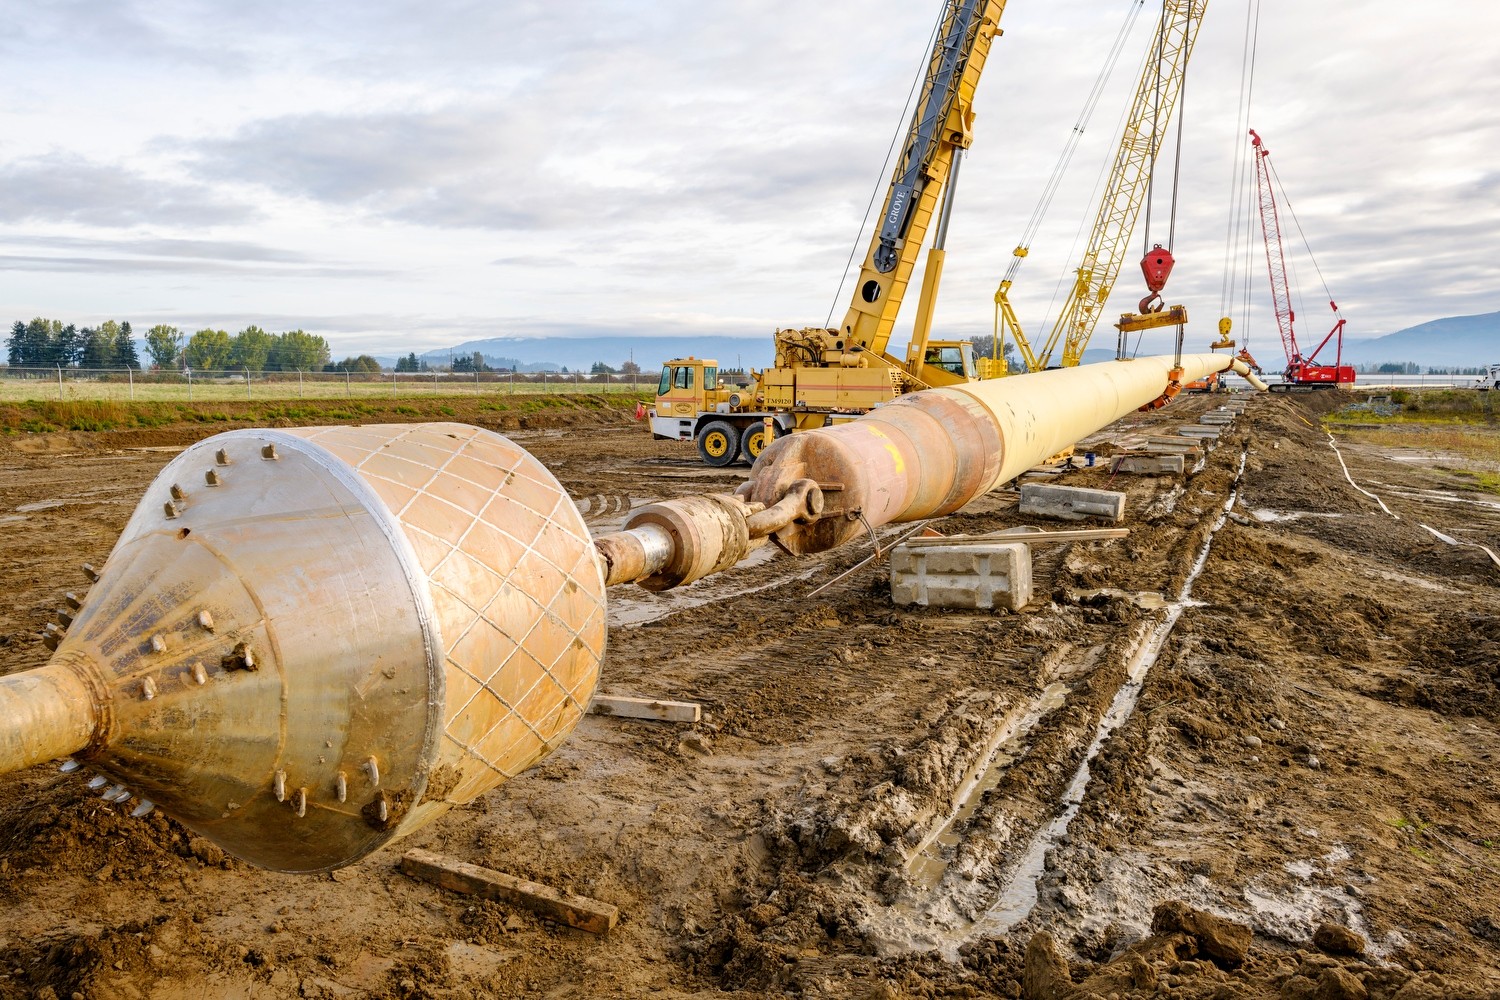 Construction site with large pipeline, red crane, yellow crane, excavator, and truck in mud